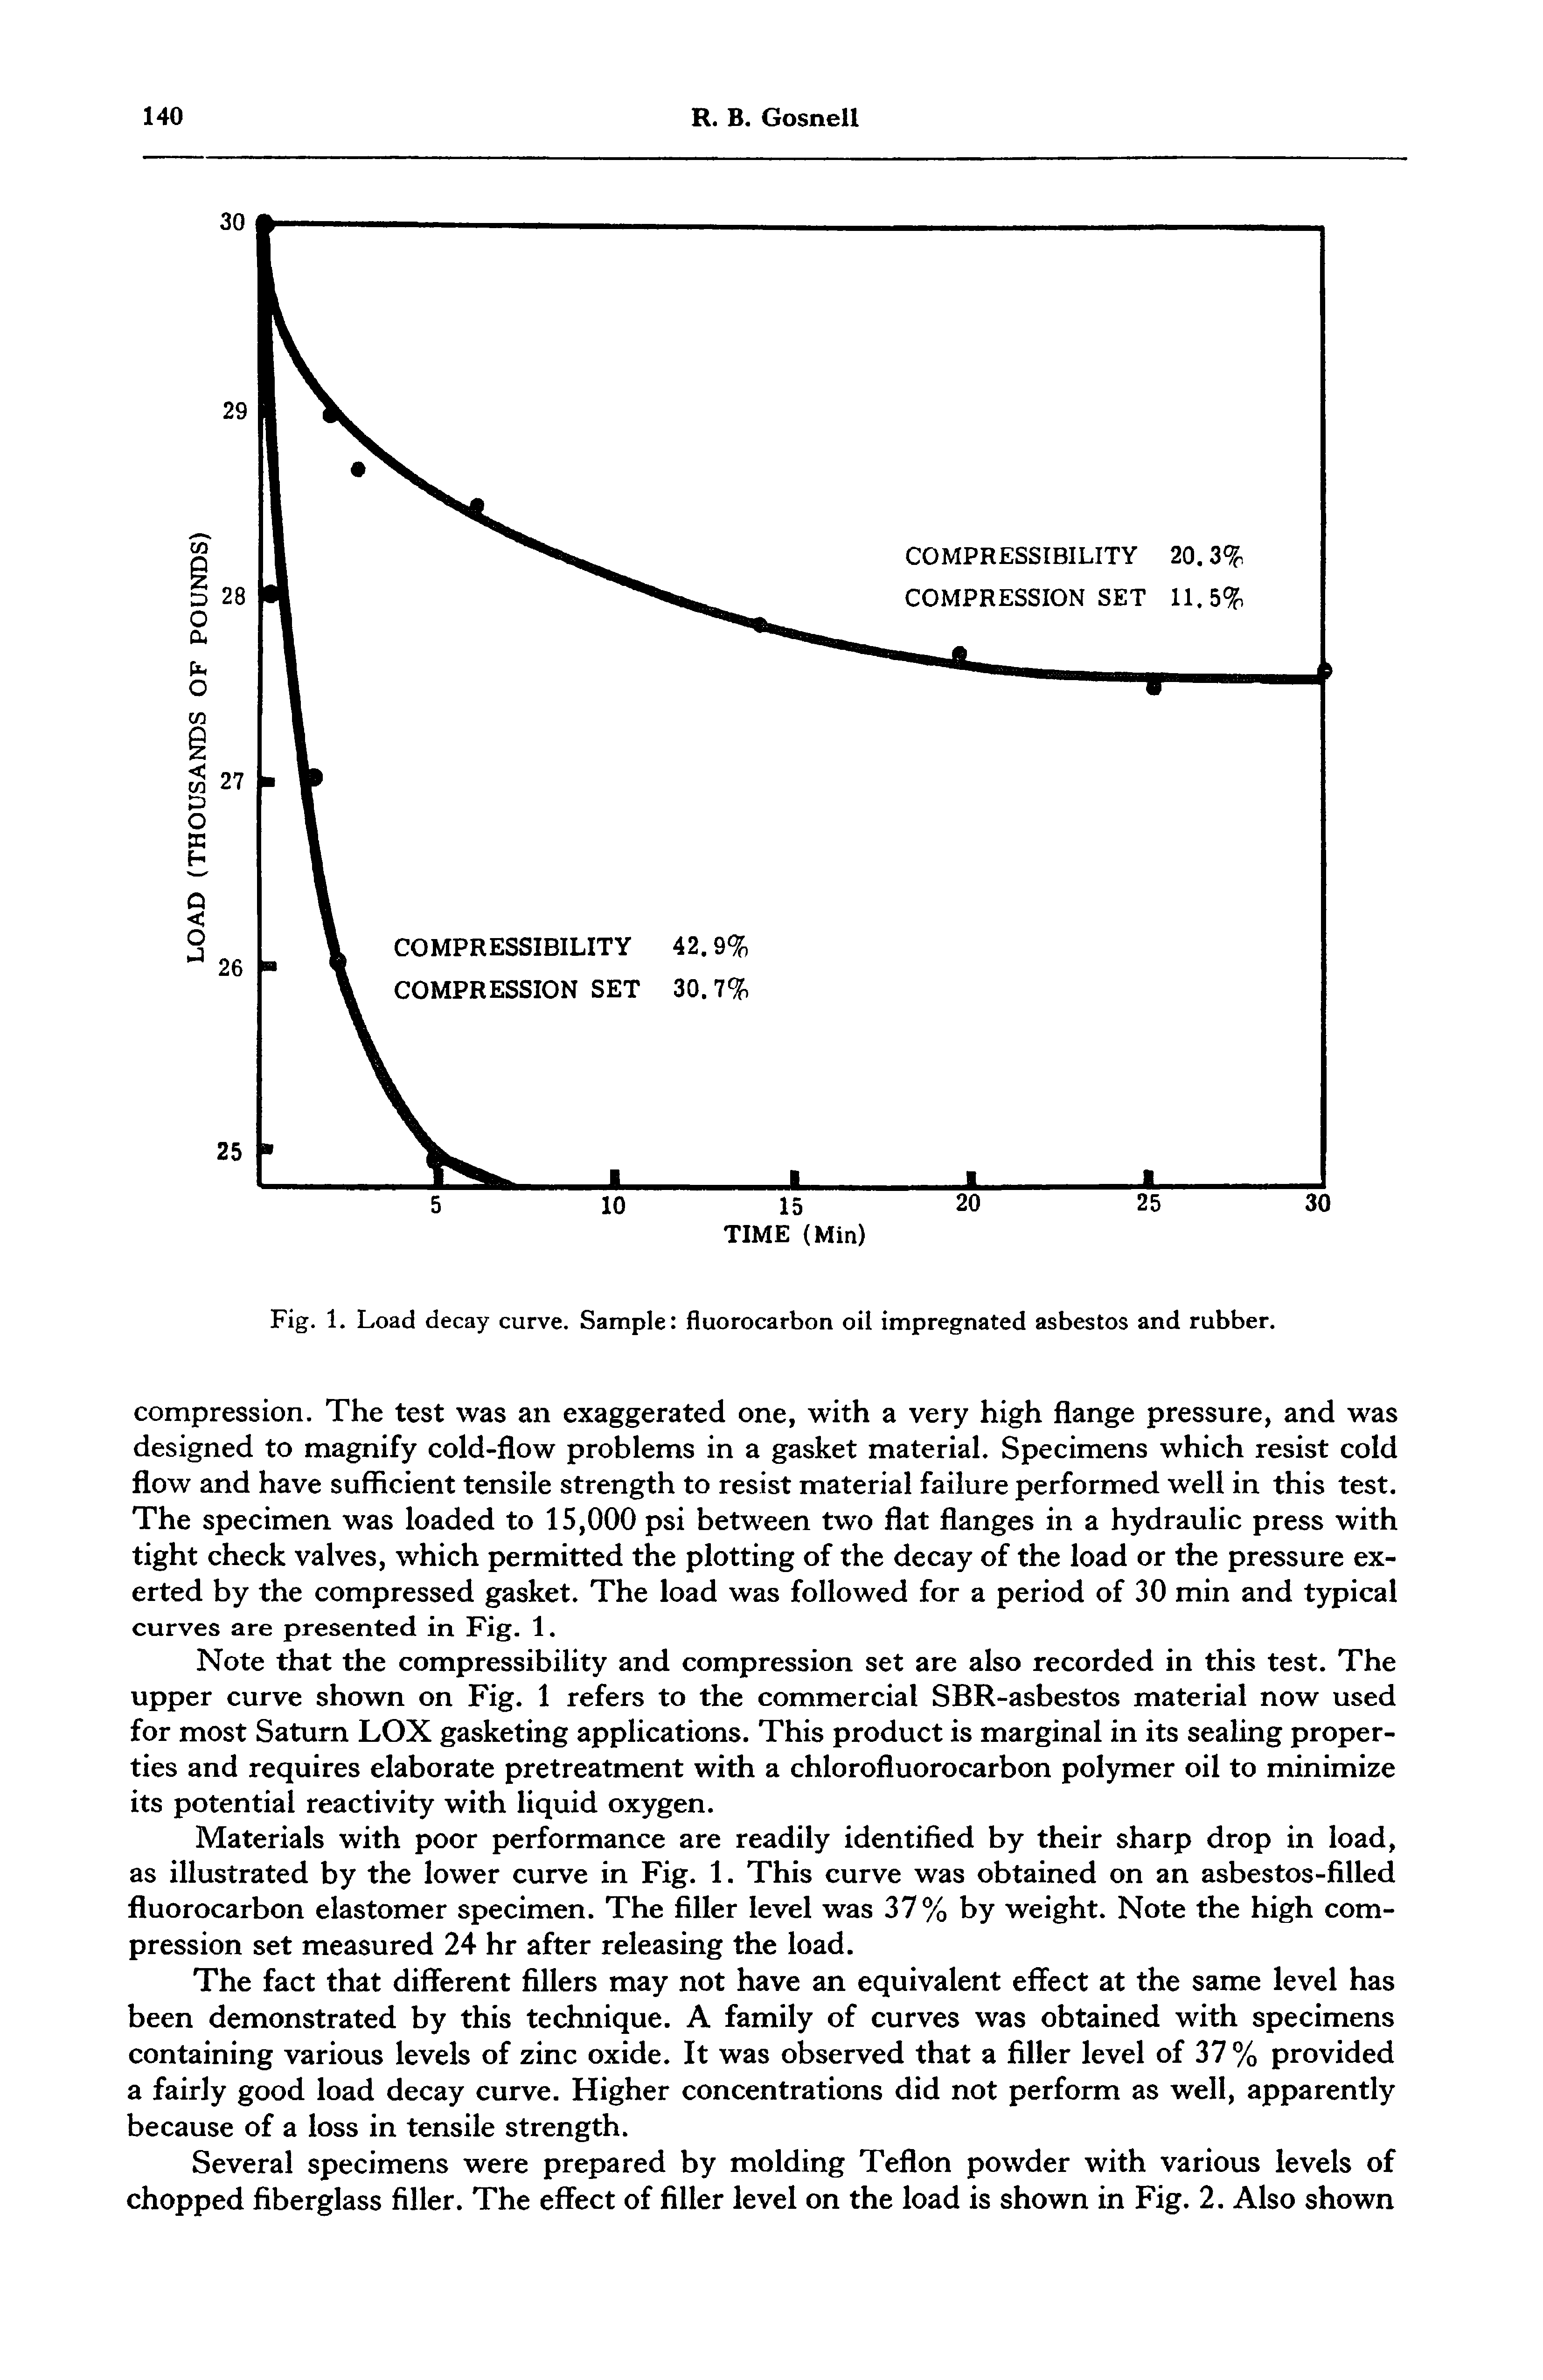 Fig. 1. Load decay curve. Sample fluorocarbon oil impregnated asbestos and rubber.